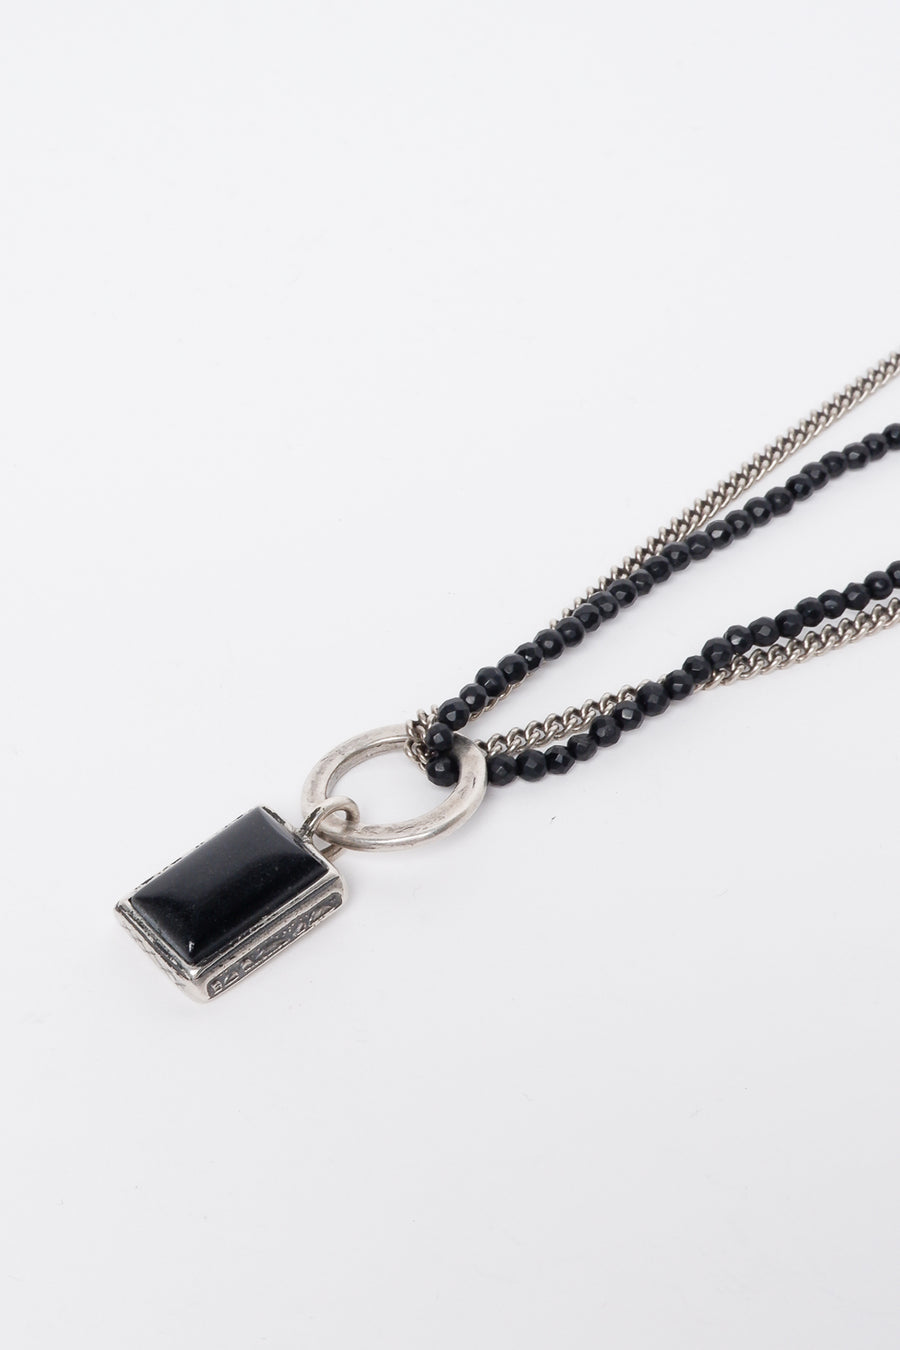 Buy the GOTI CN1171 Necklace at Intro. Spend £50 for free UK delivery. Official stockists. We ship worldwide.